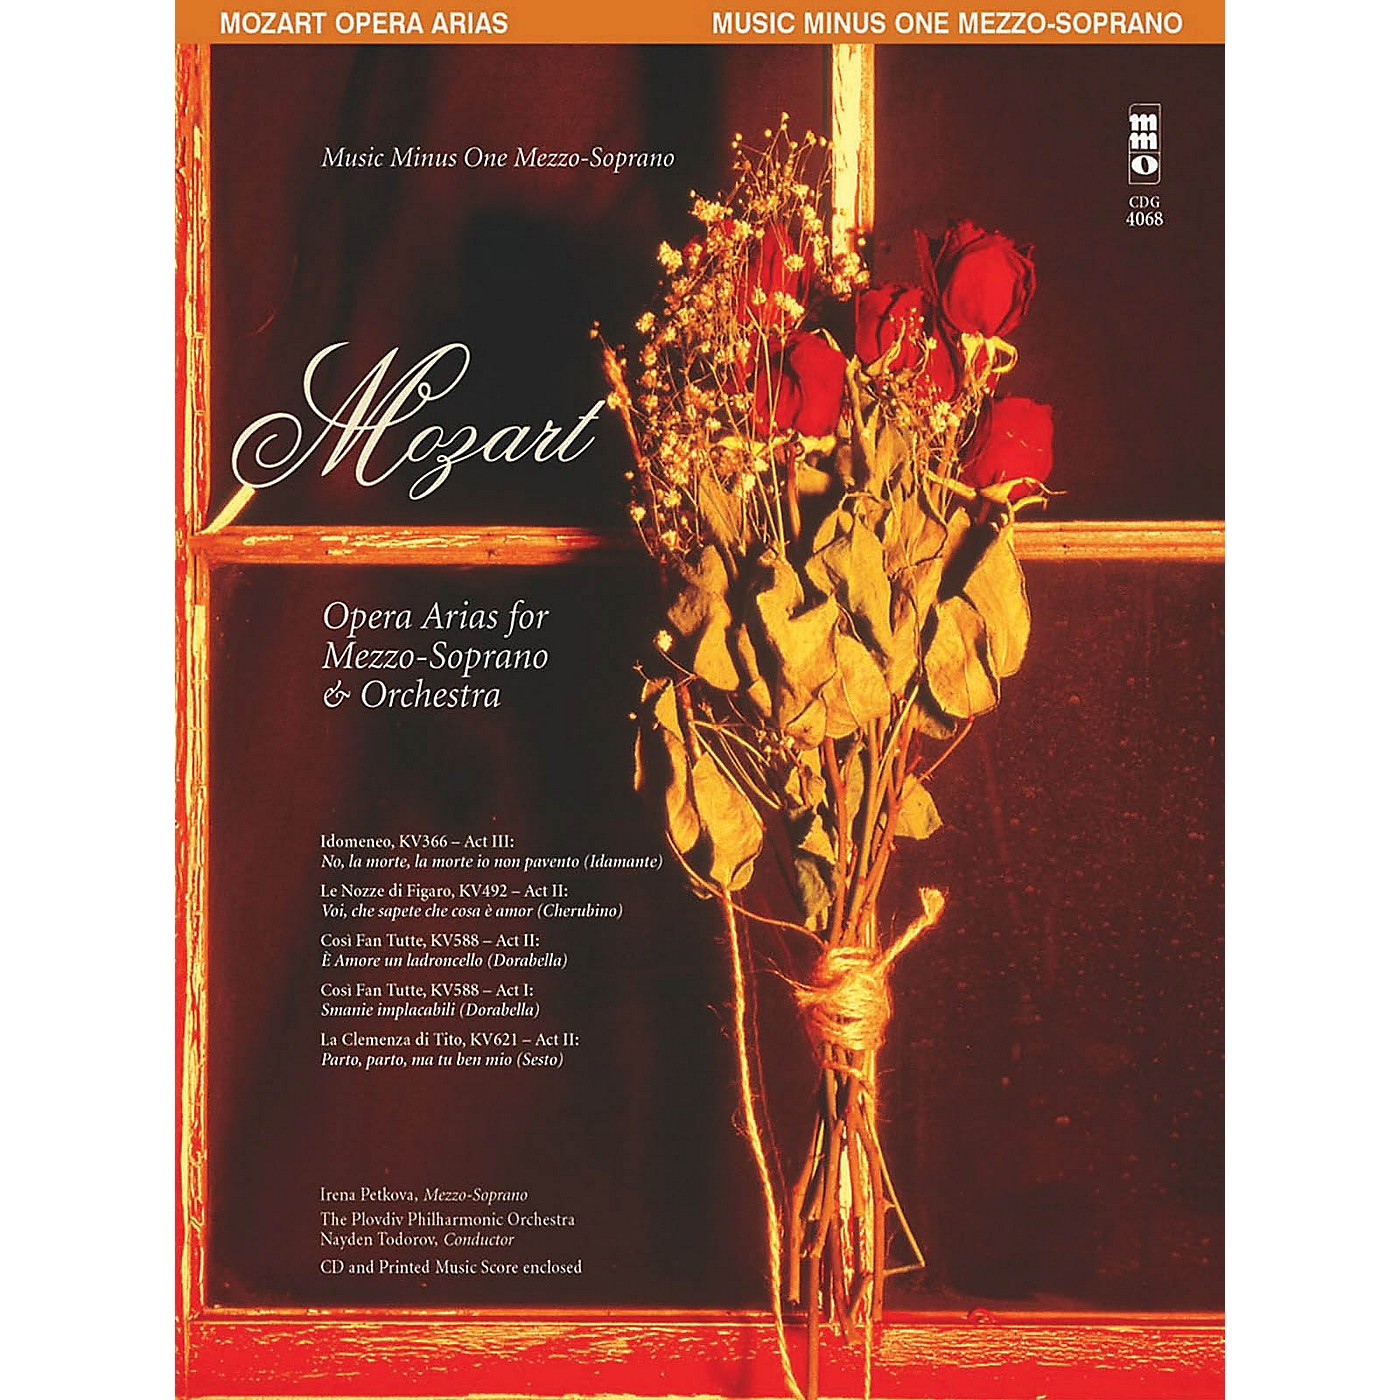 Music Minus One Mozart Opera Arias for Mezzo-Soprano and Orchestra Music Minus One Softcover with CD by Mozart thumbnail